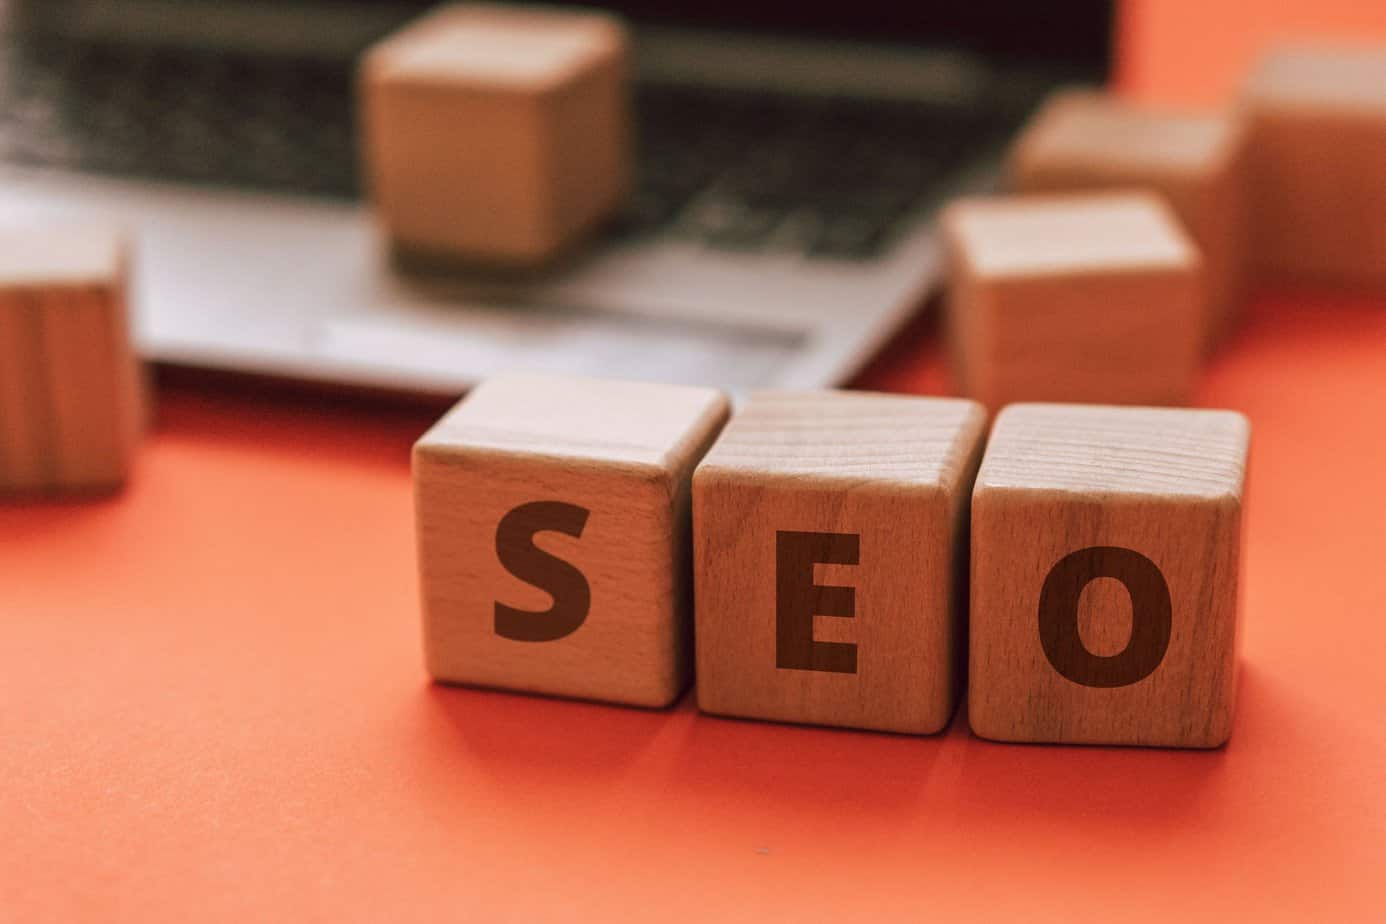 On-Page SEO: A BEST COMPLETE GUIDE In 2022